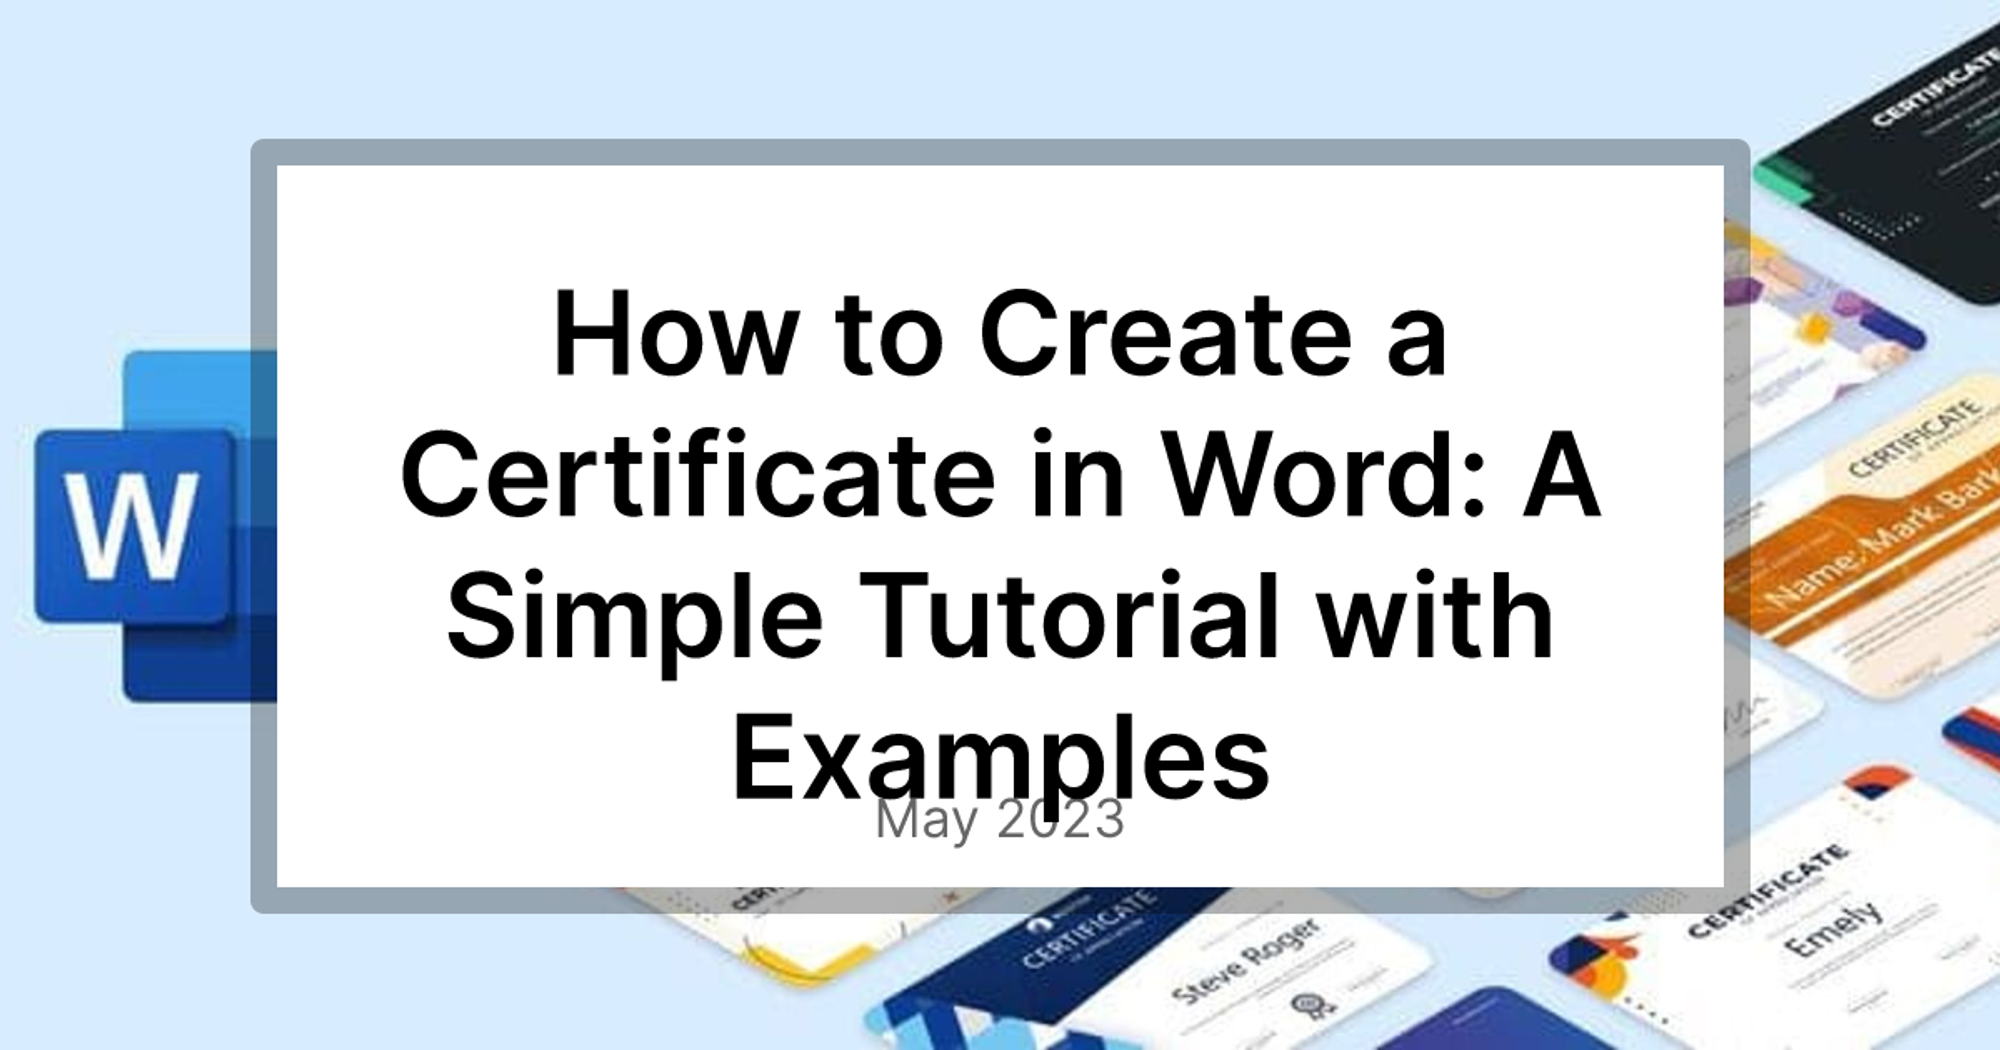 How to Create a Certificate in Word: A Simple Tutorial with Examples